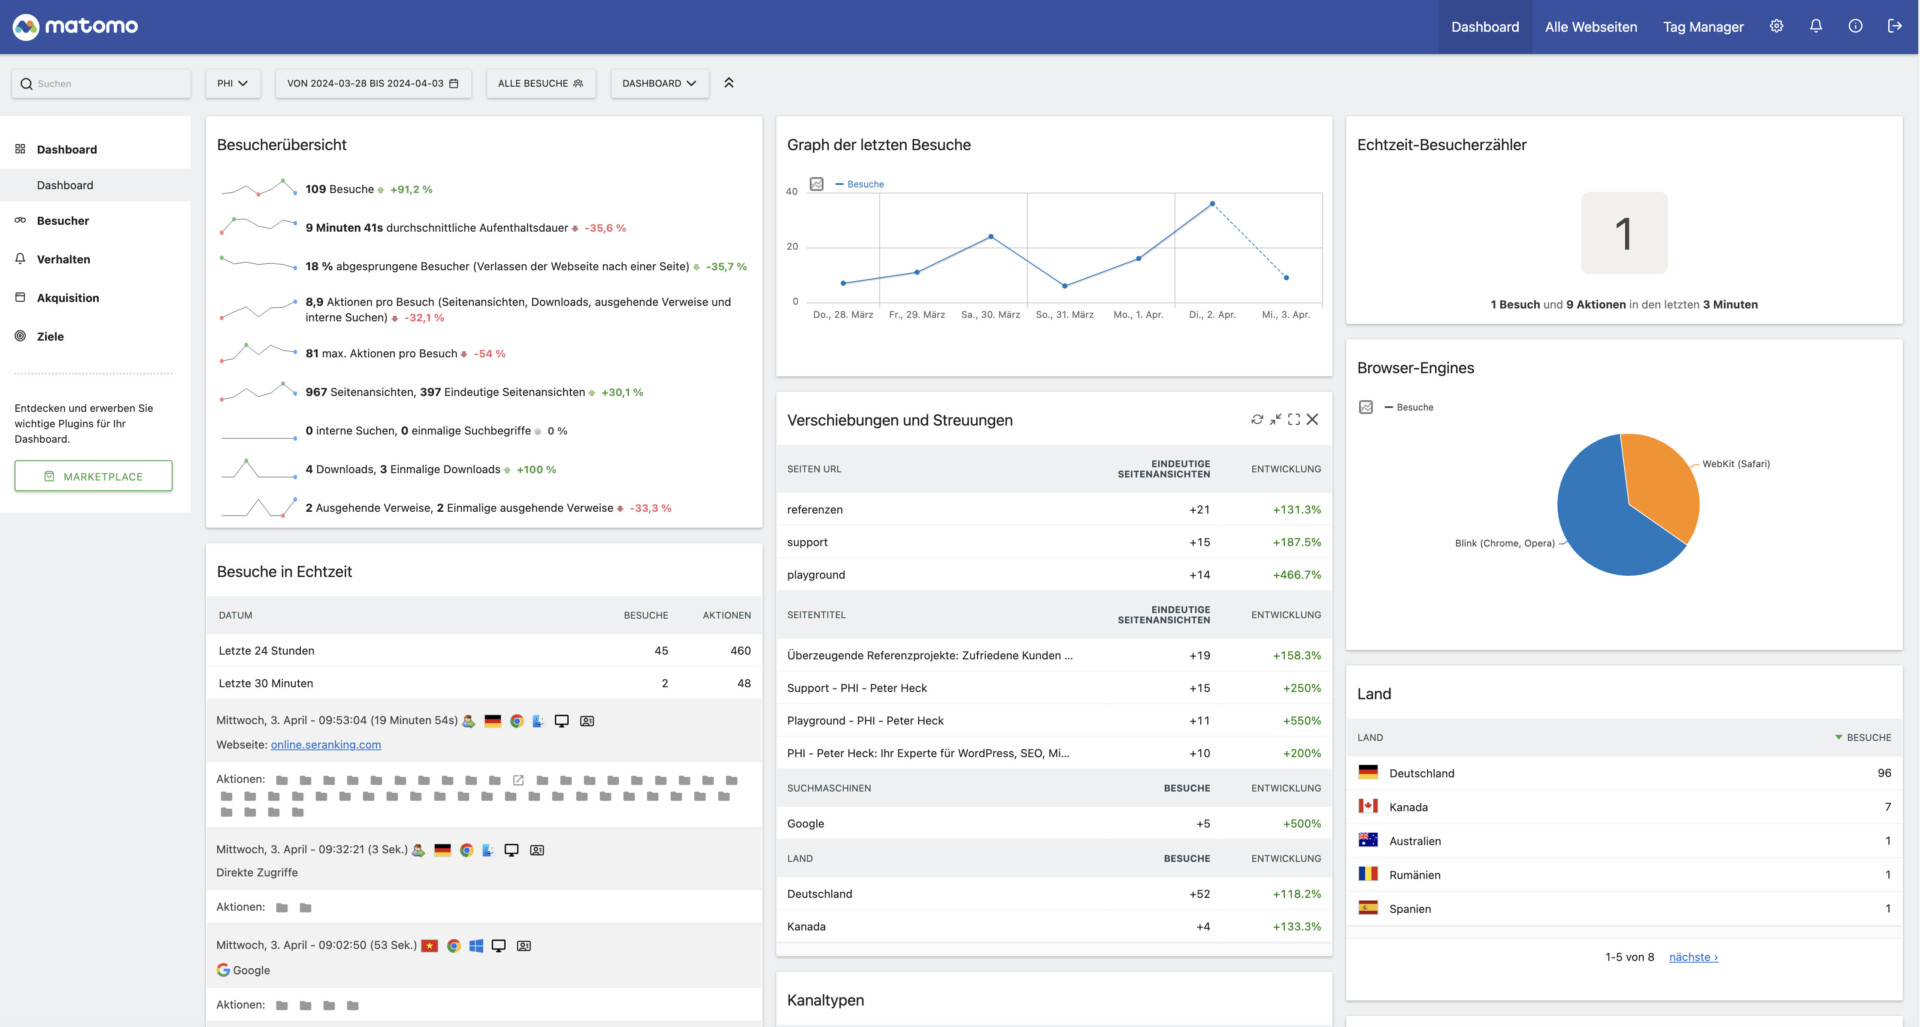 Web analytics dashboard with visitor statistics and real-time data.